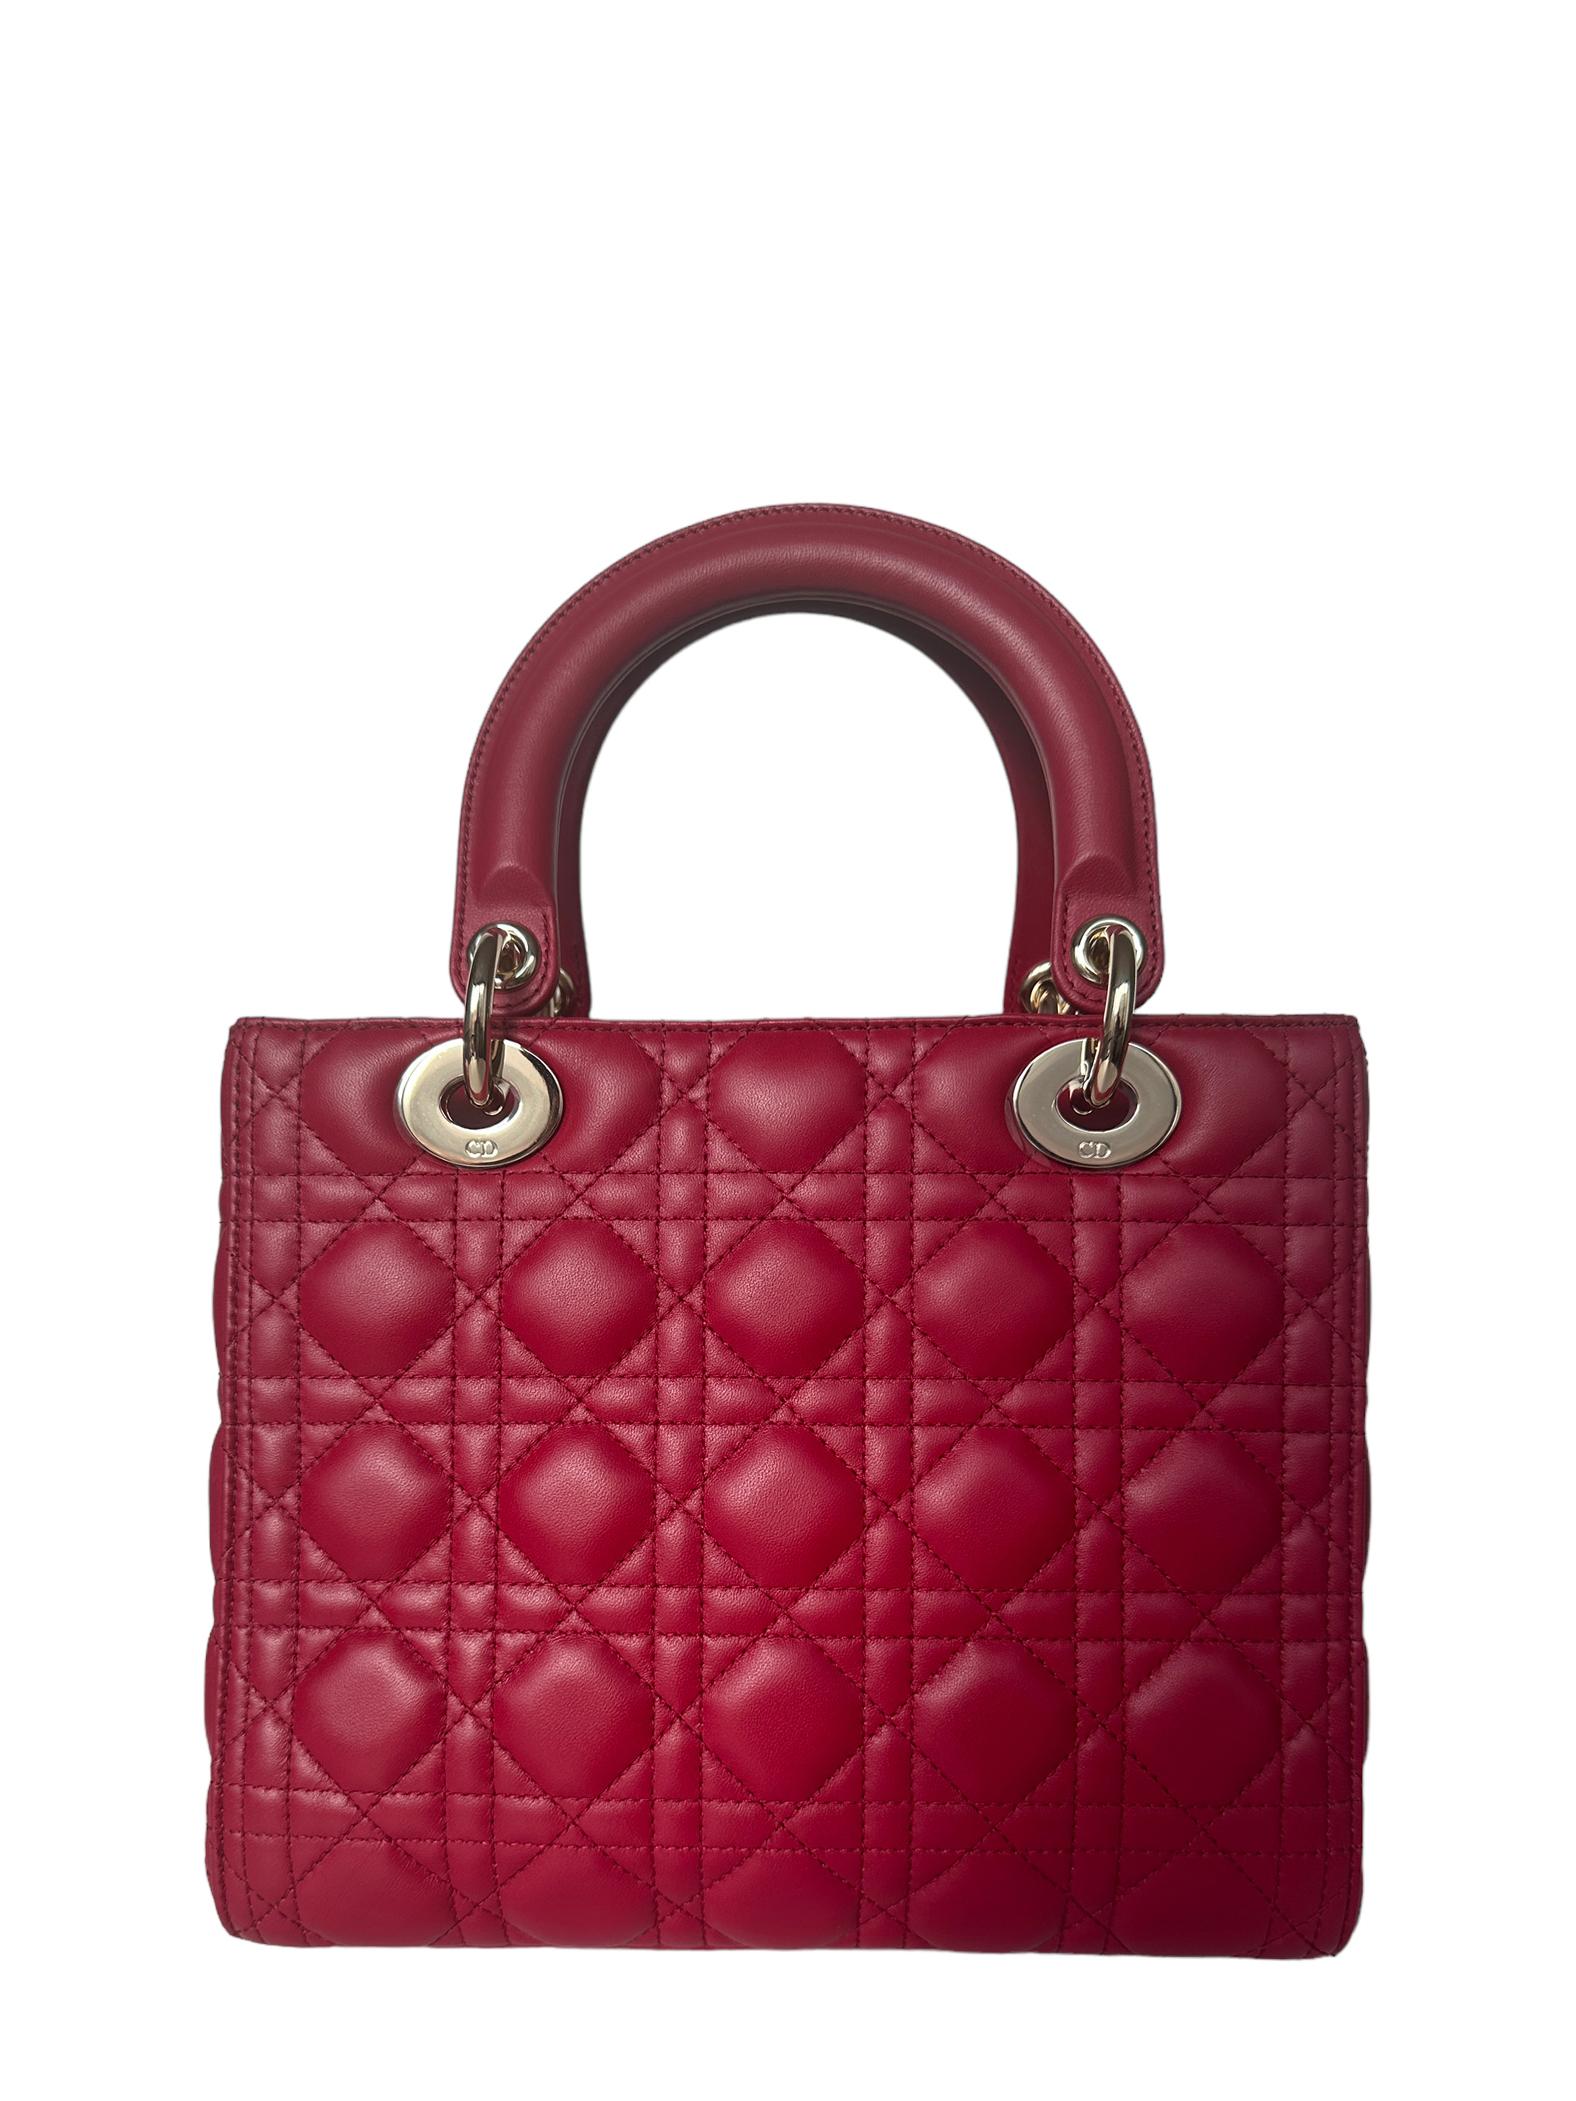 Christian Dior Red Leather Cannage Quilted Medium Lady Dior Bag

Made In: Italy
Year of Production: 2023
Color: Red
Hardware: Goldtone
Materials: Lambskin Leather
Lining: Suede
Closure/Opening:Center flap
Exterior Pockets: None
Interior Pockets: 